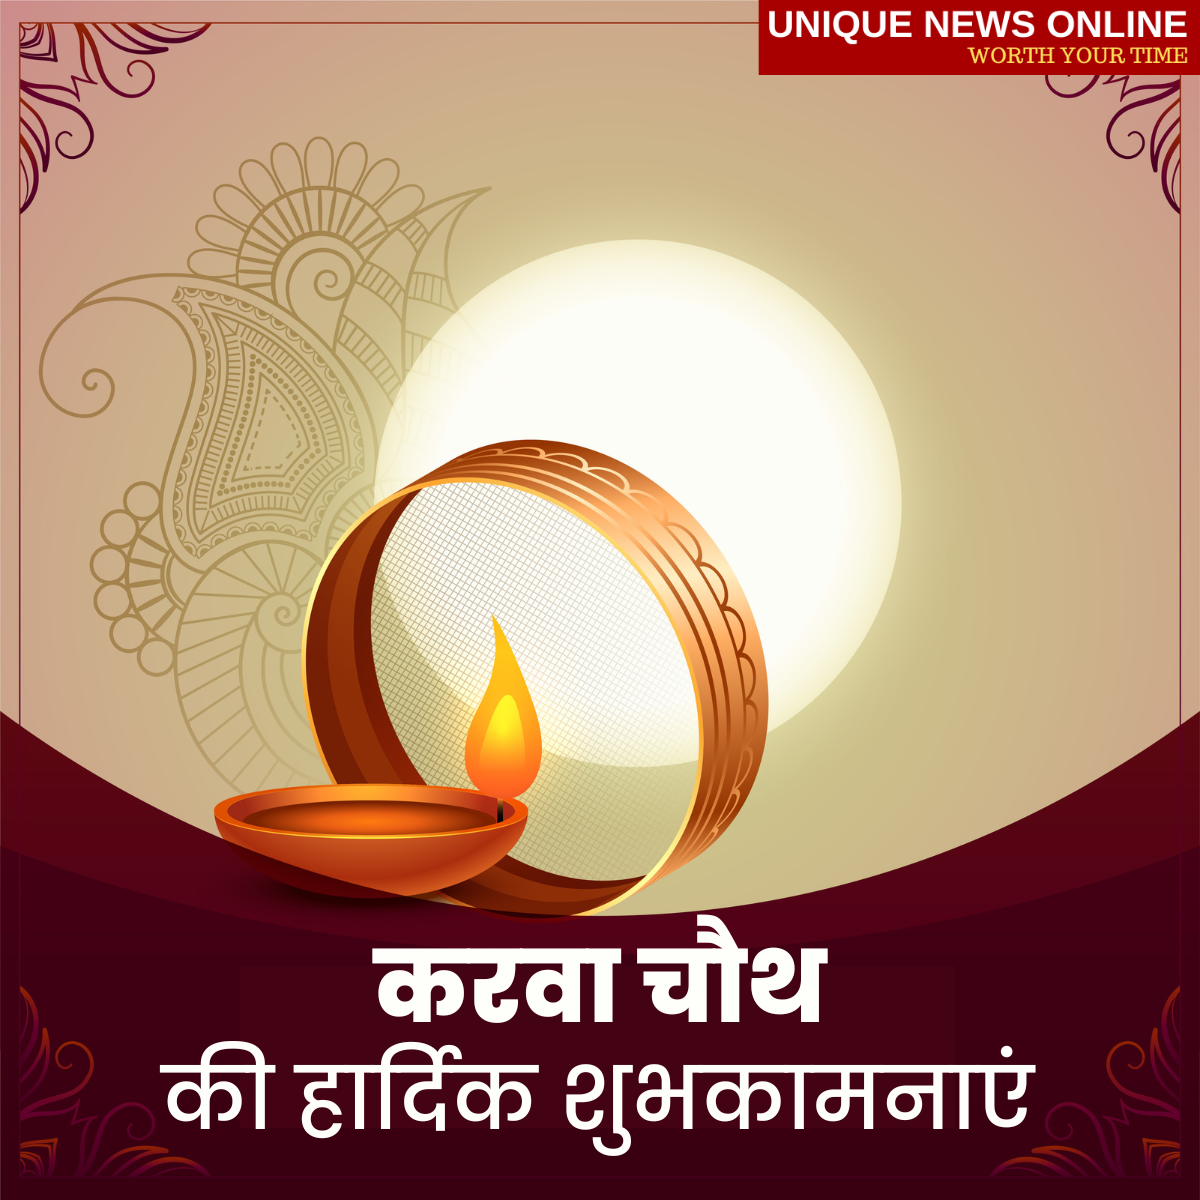 Happy Karwa Chauth 2022: Best Hindi Wishes, Greetings, Messages, HD Images, Quotes, Posters, Banners, and Shayari To Greet Husband/Wife